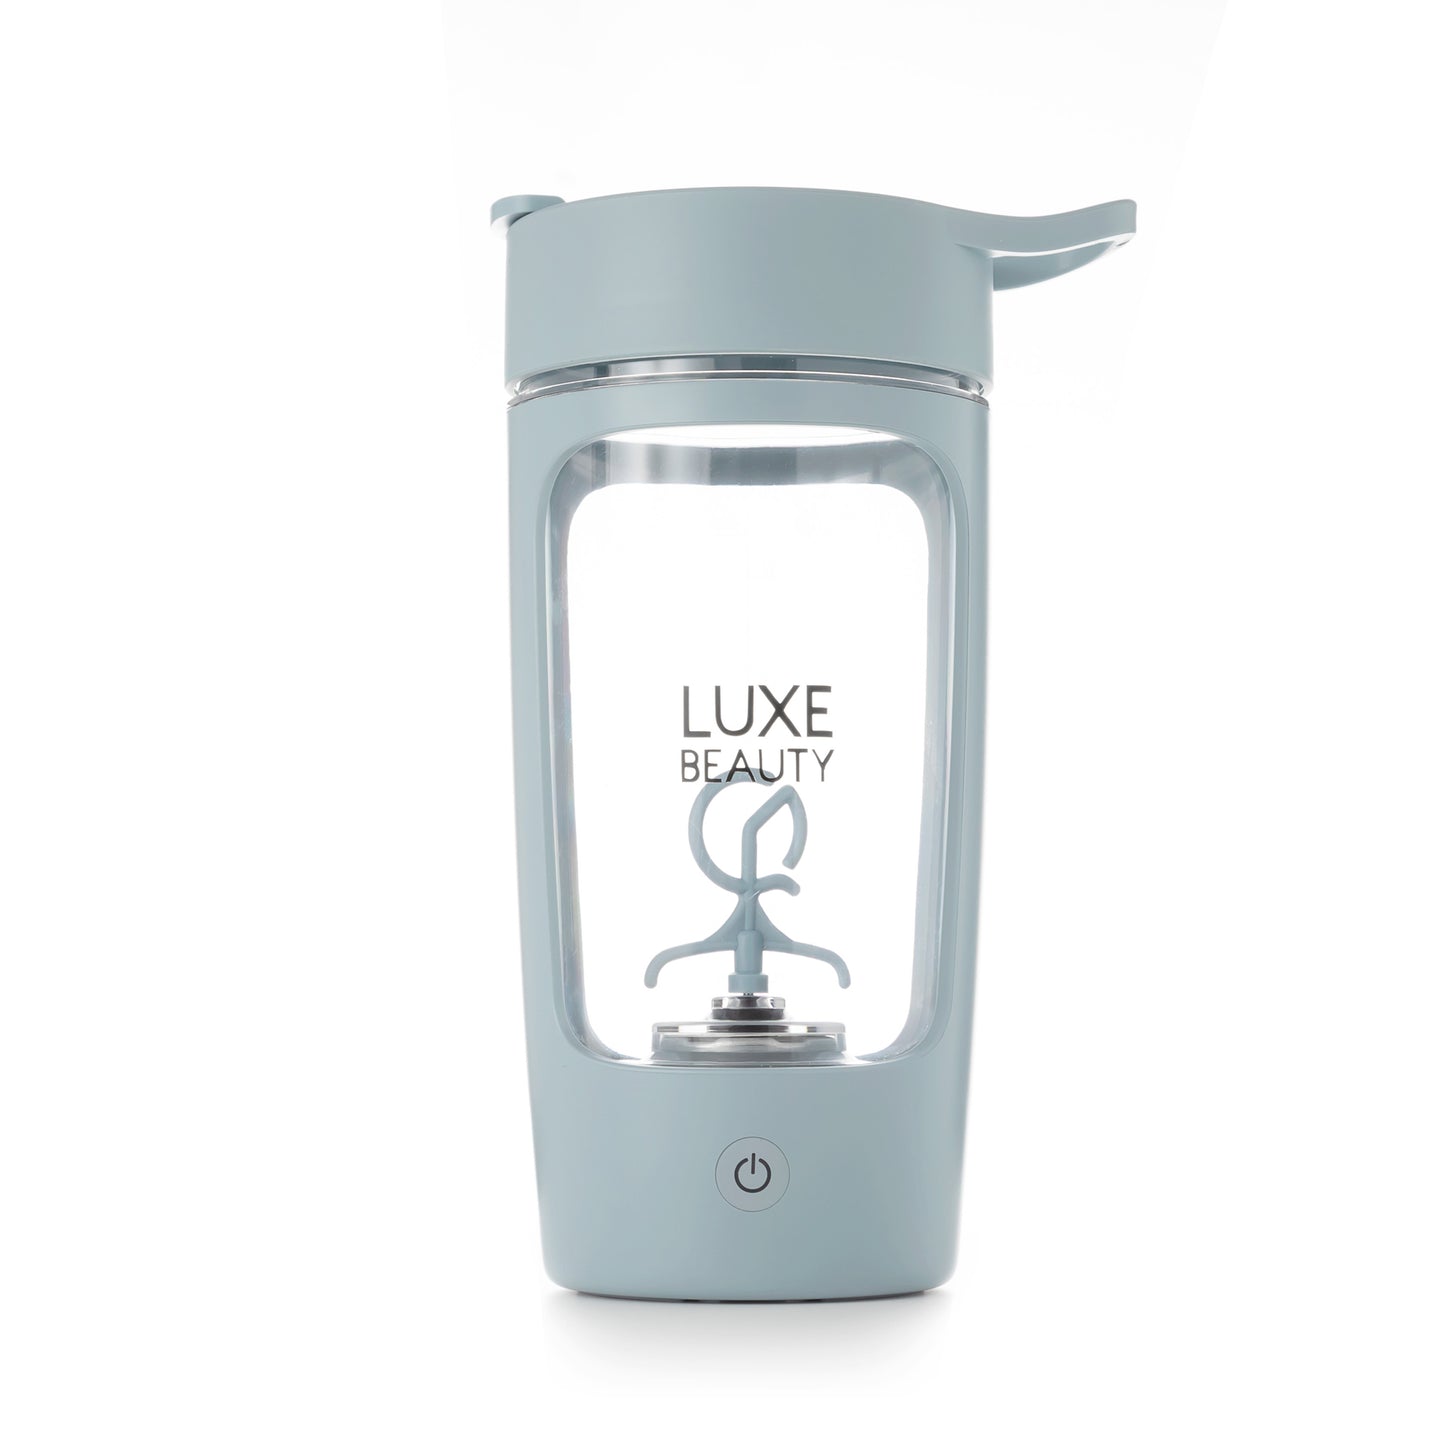 Luxe Beauty Electric Protein Mixer